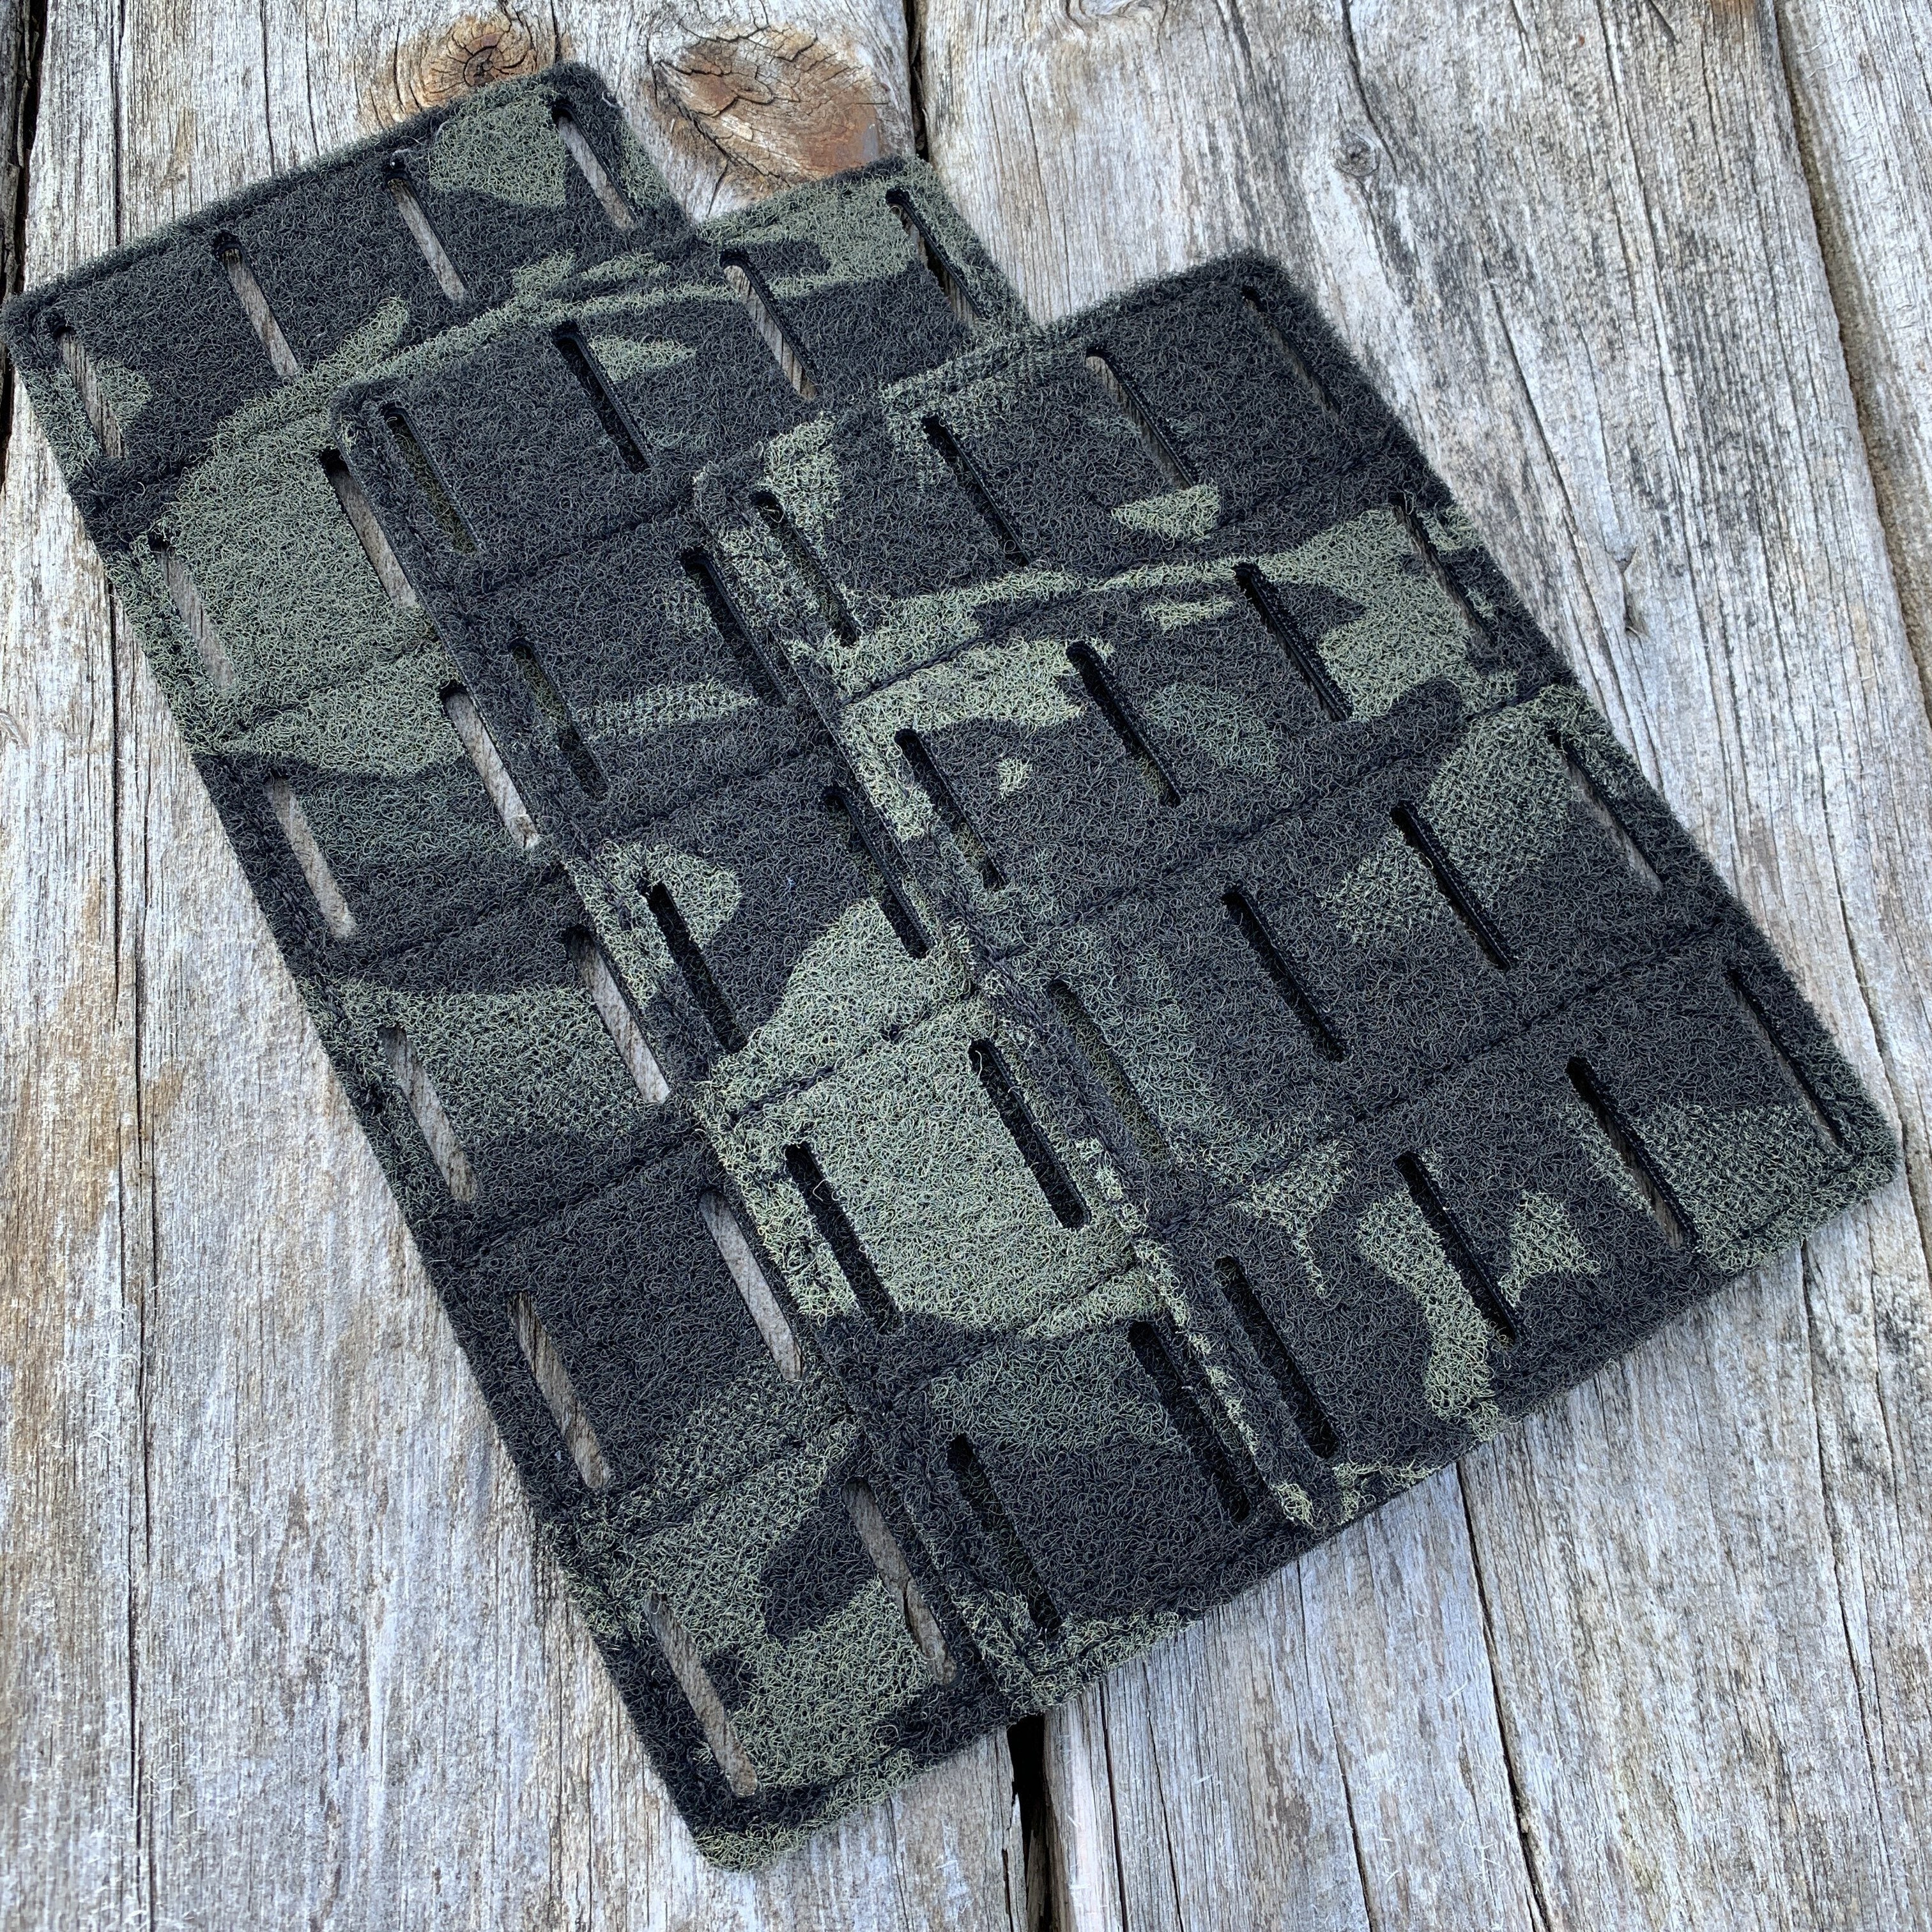 Loop MOLLE clip – PatchPanel